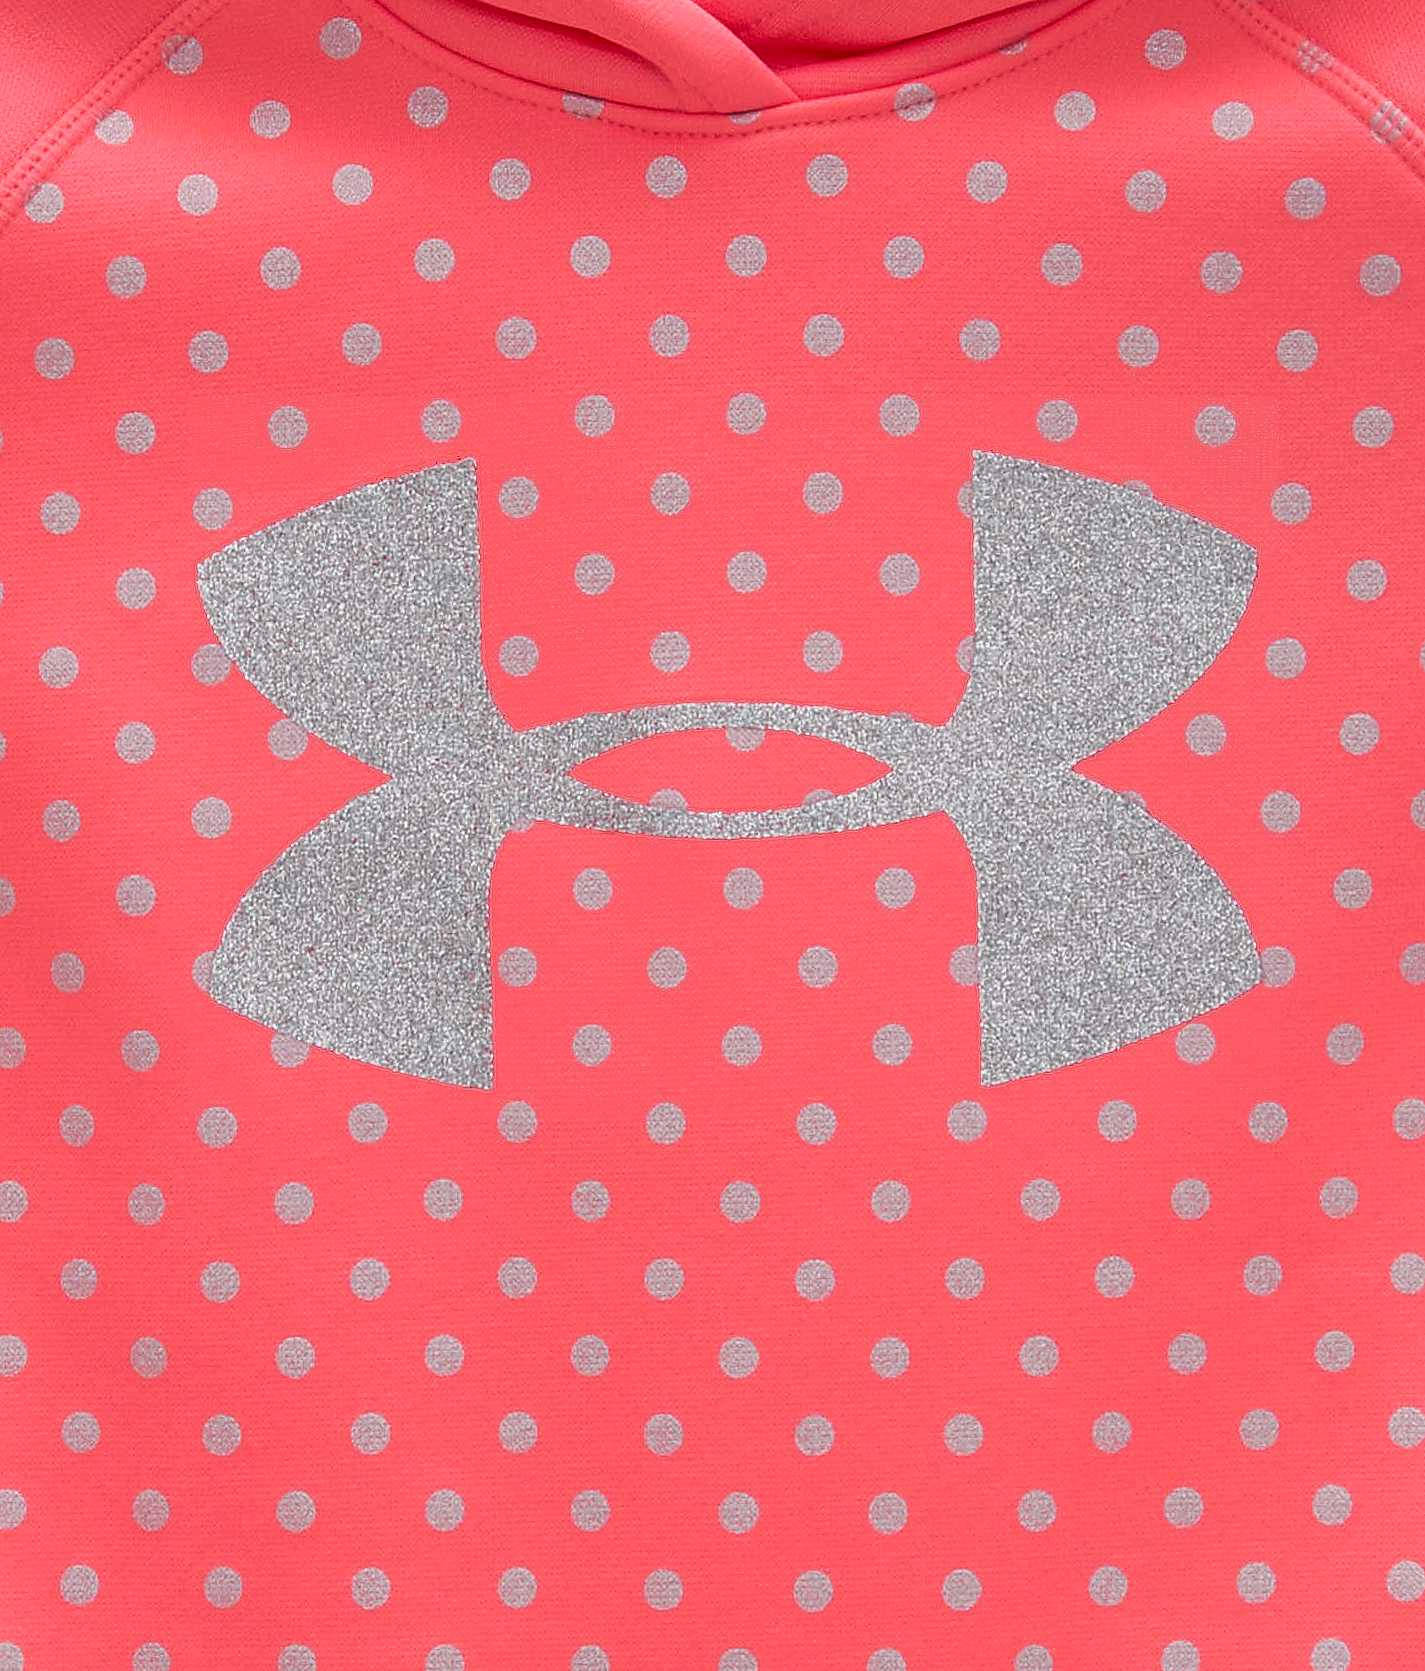 Under Armour Polka Dots Background